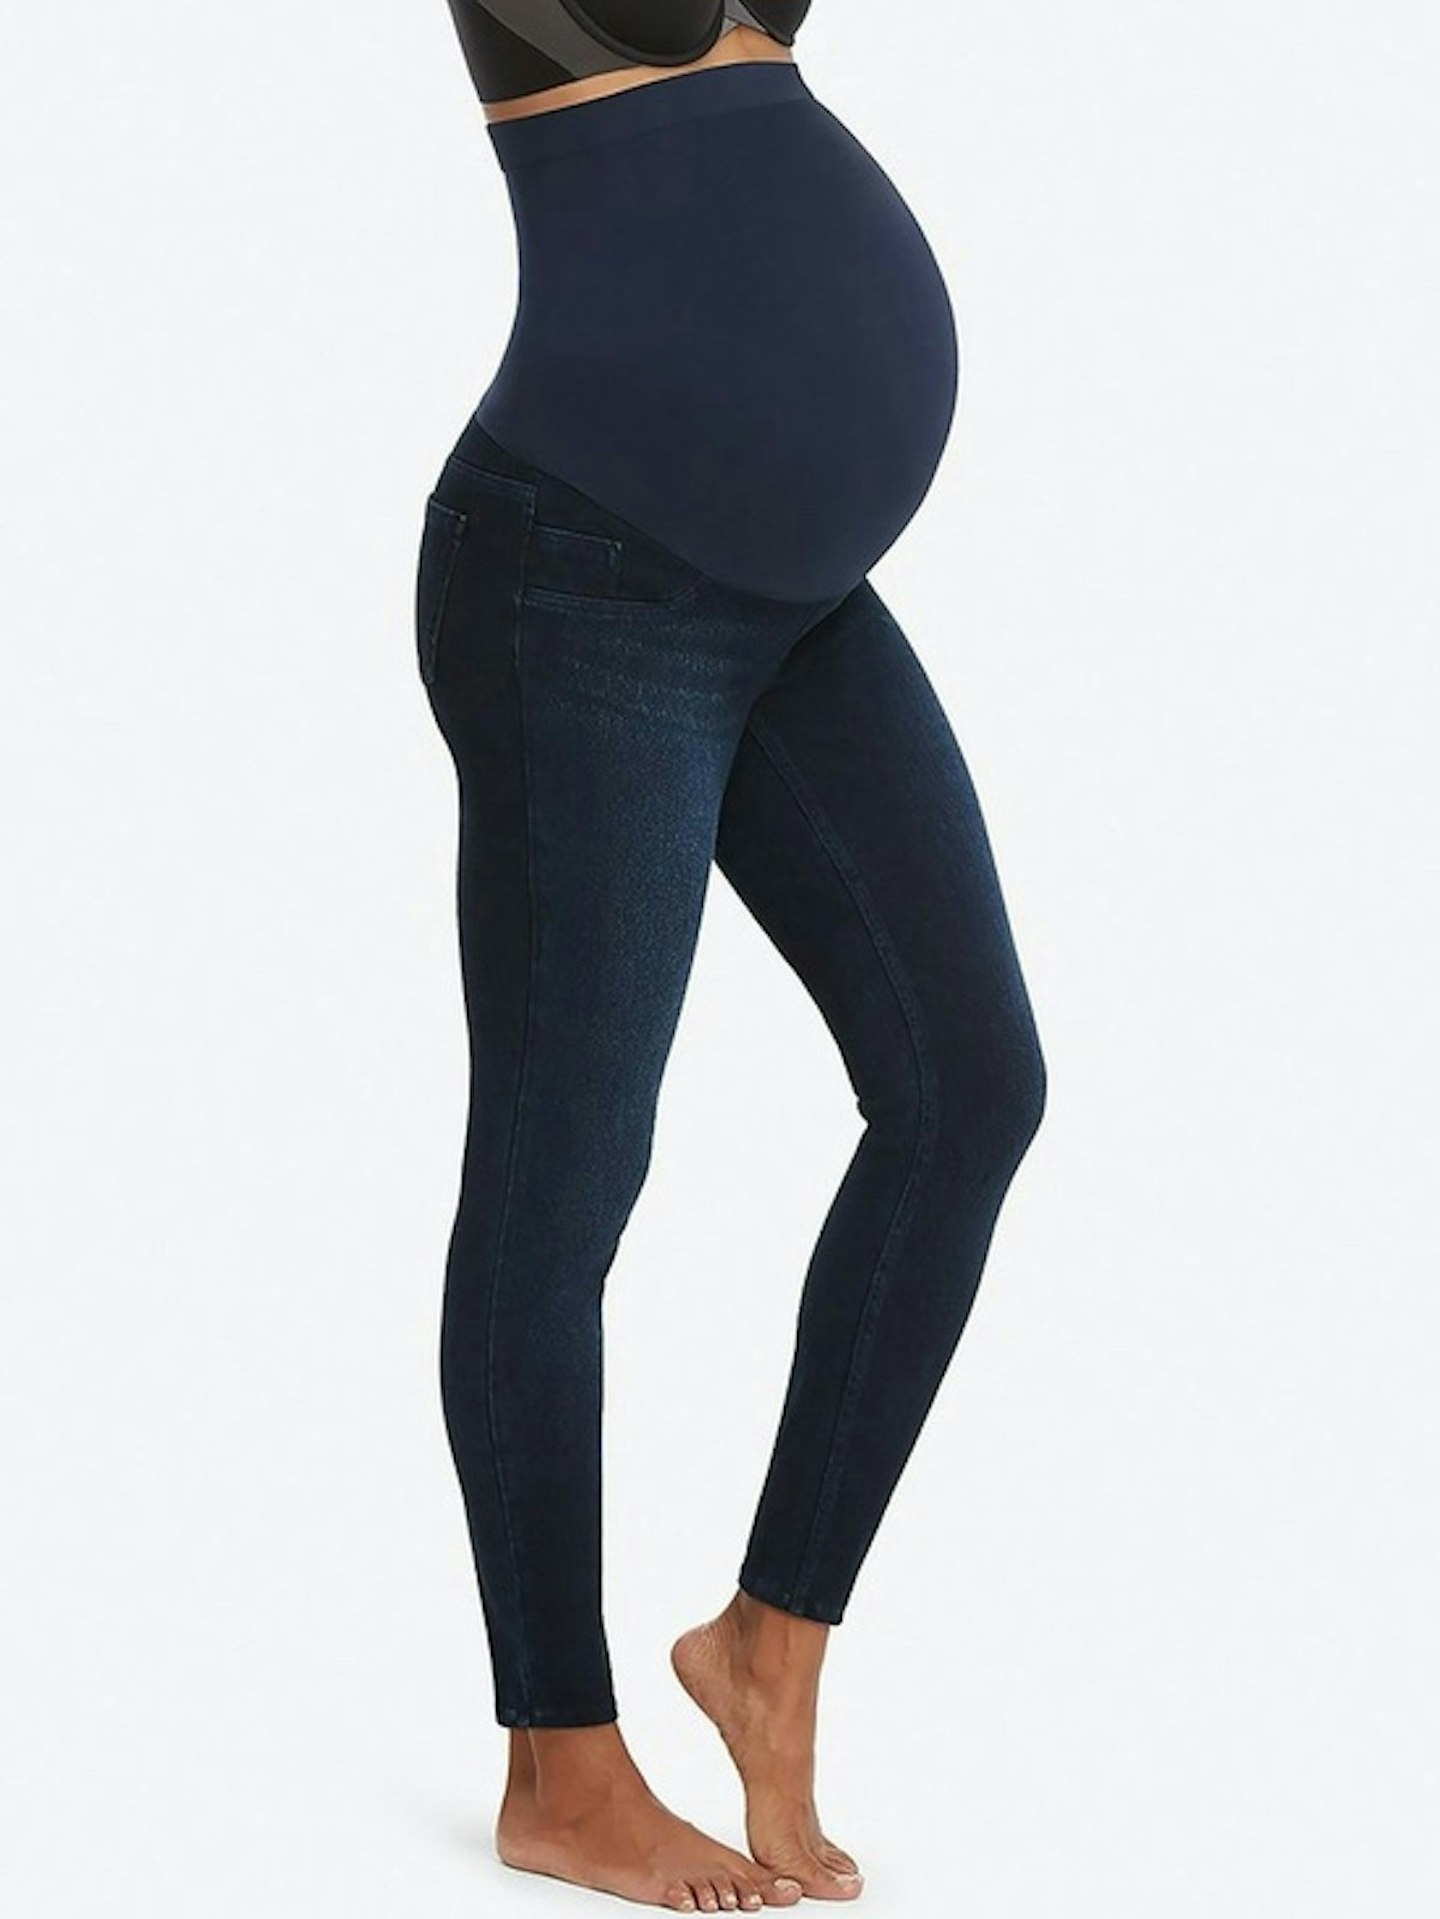 The Best Maternity Jeans That Are Both Stylish And Comfortable